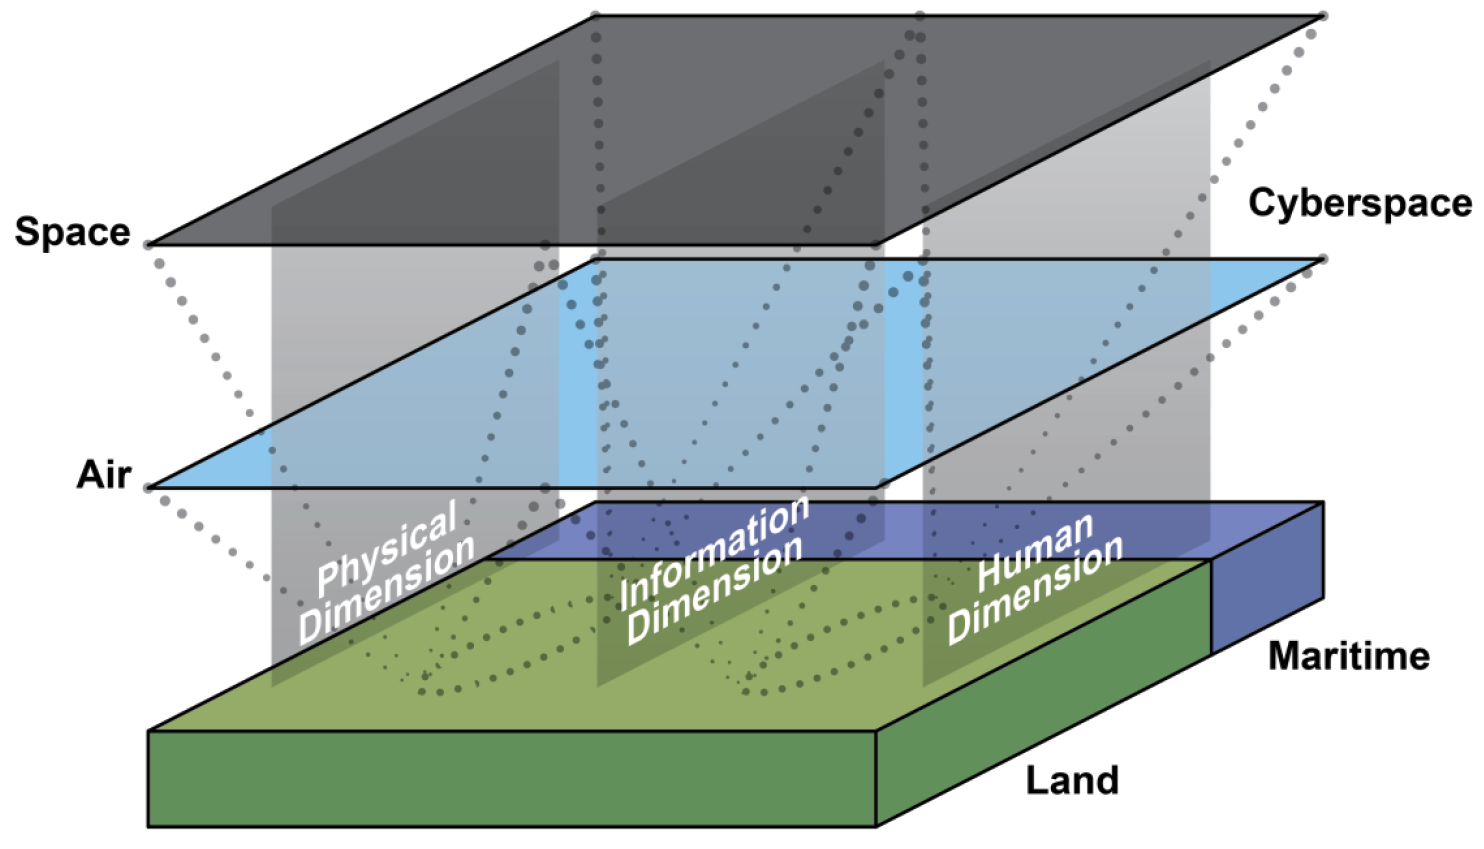 Figure 4. Domains and Dimensions of the MDO Operational Environment as Defined in U.S. Army Field Manual (FM) 3-0, Operations.